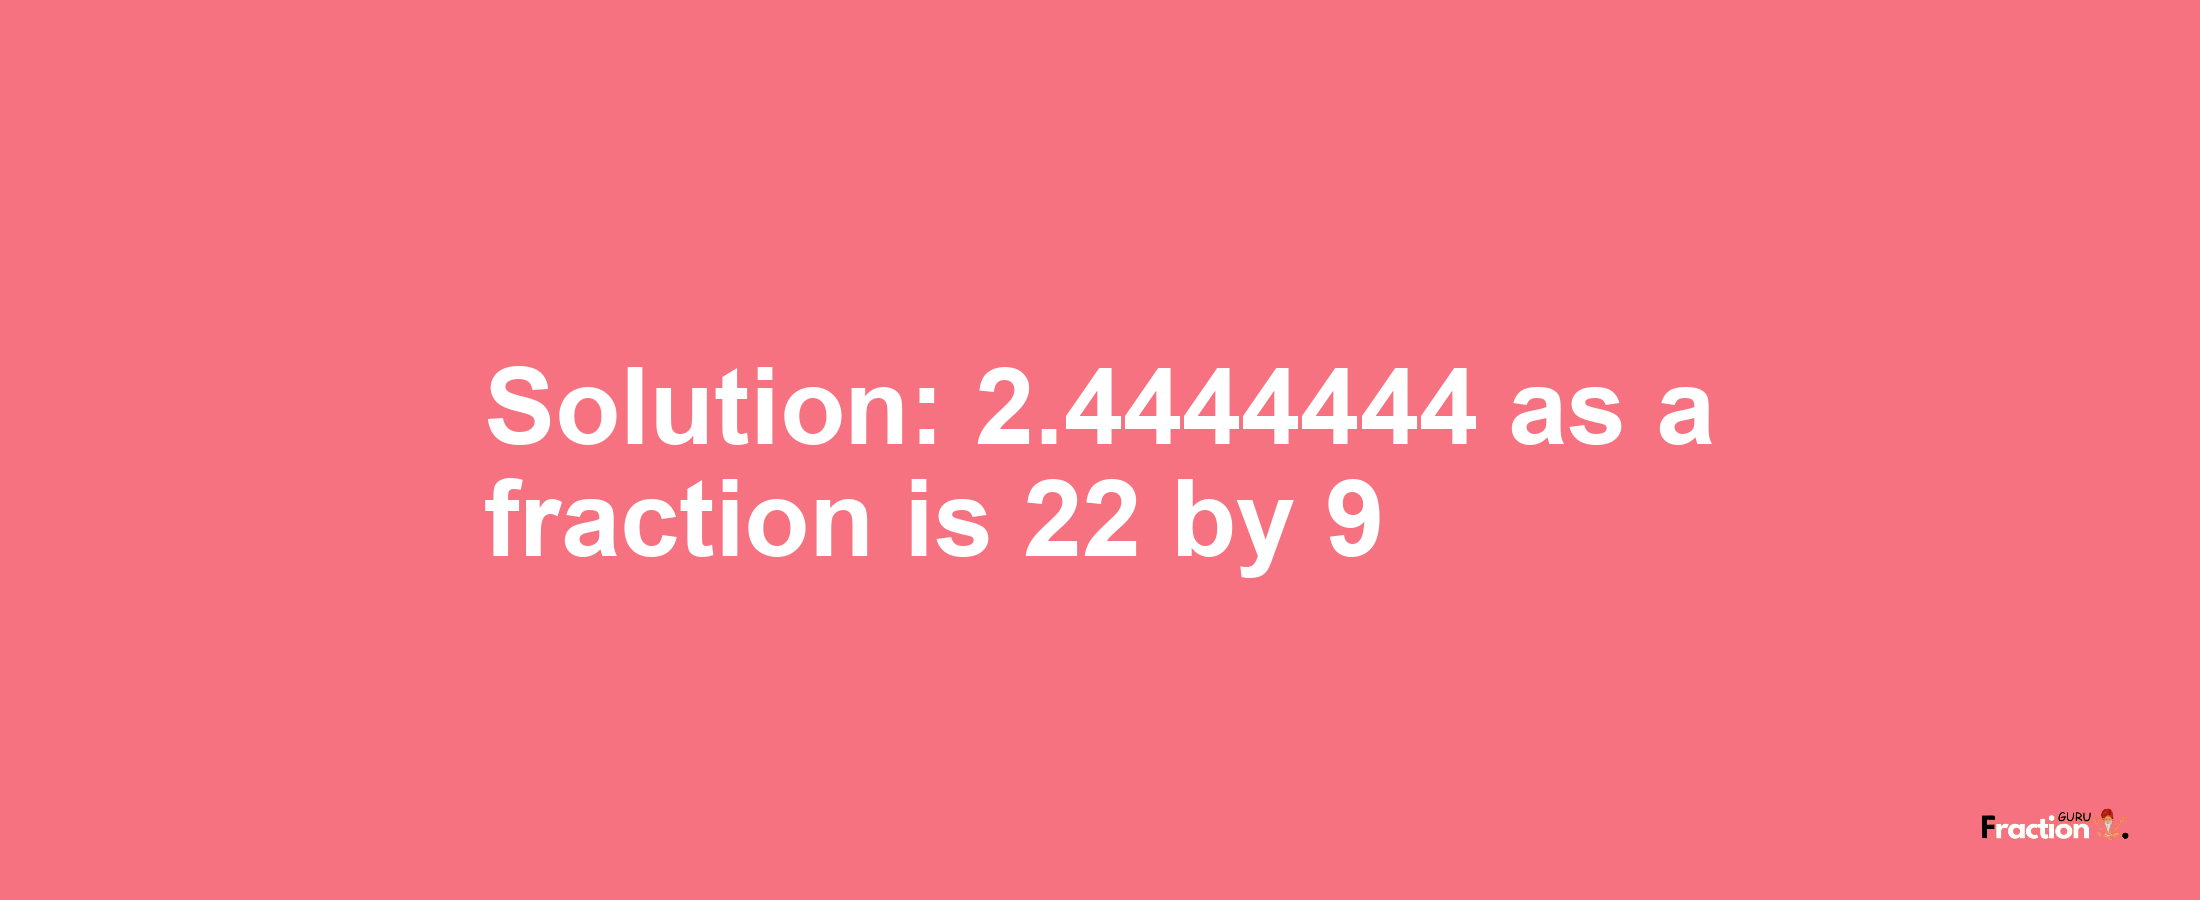 Solution:2.4444444 as a fraction is 22/9